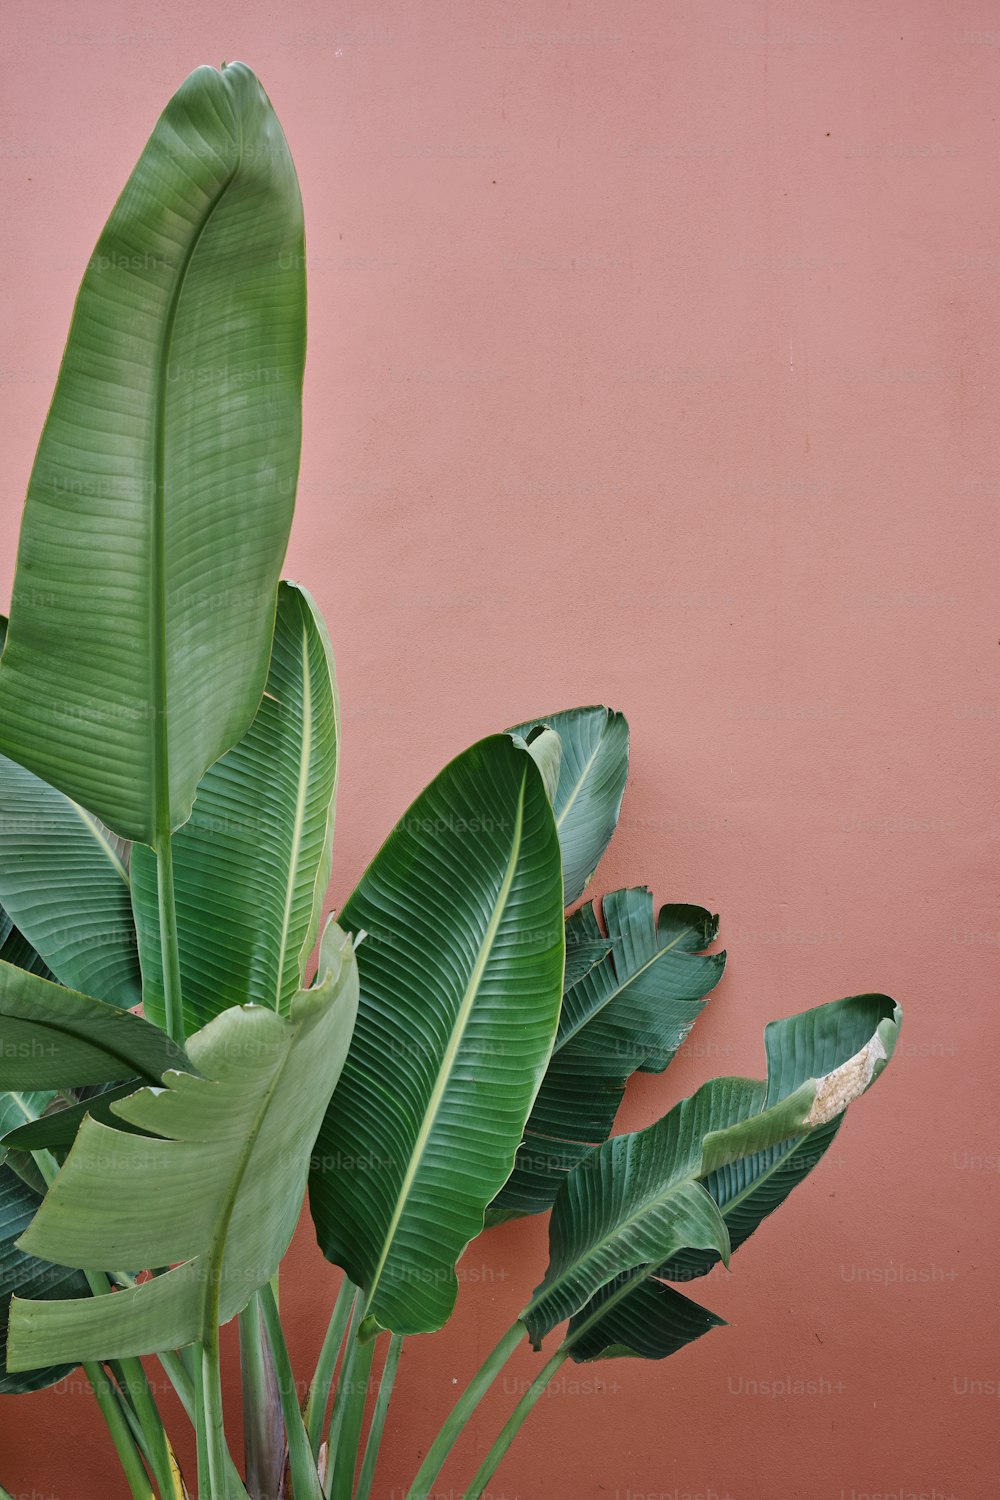 a plant with green leaves against a pink wall